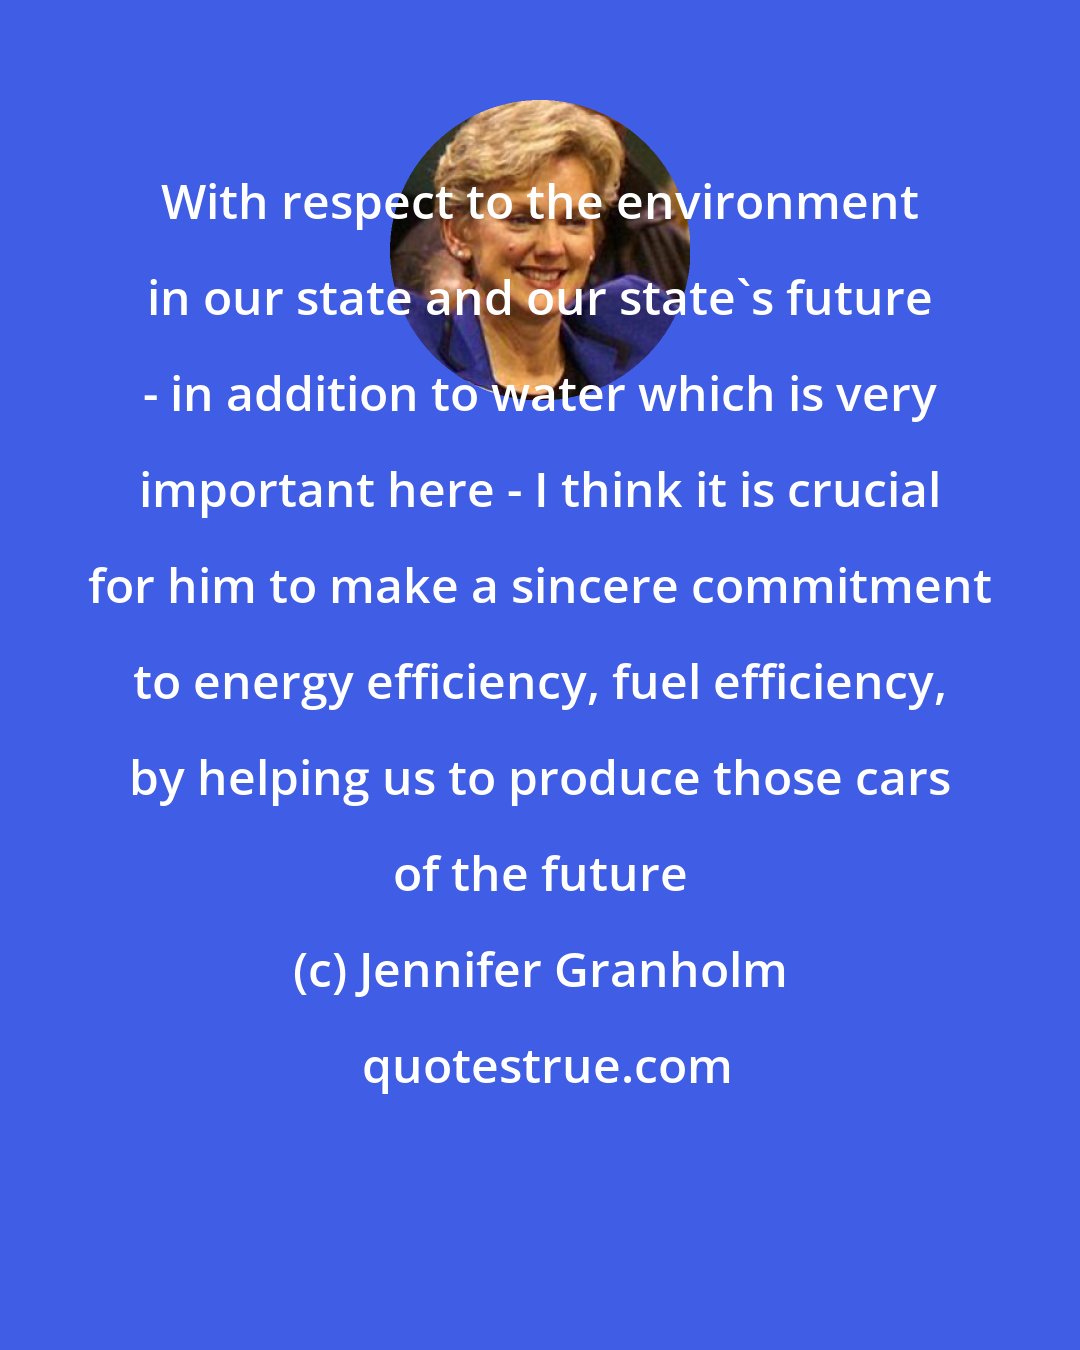 Jennifer Granholm: With respect to the environment in our state and our state's future - in addition to water which is very important here - I think it is crucial for him to make a sincere commitment to energy efficiency, fuel efficiency, by helping us to produce those cars of the future